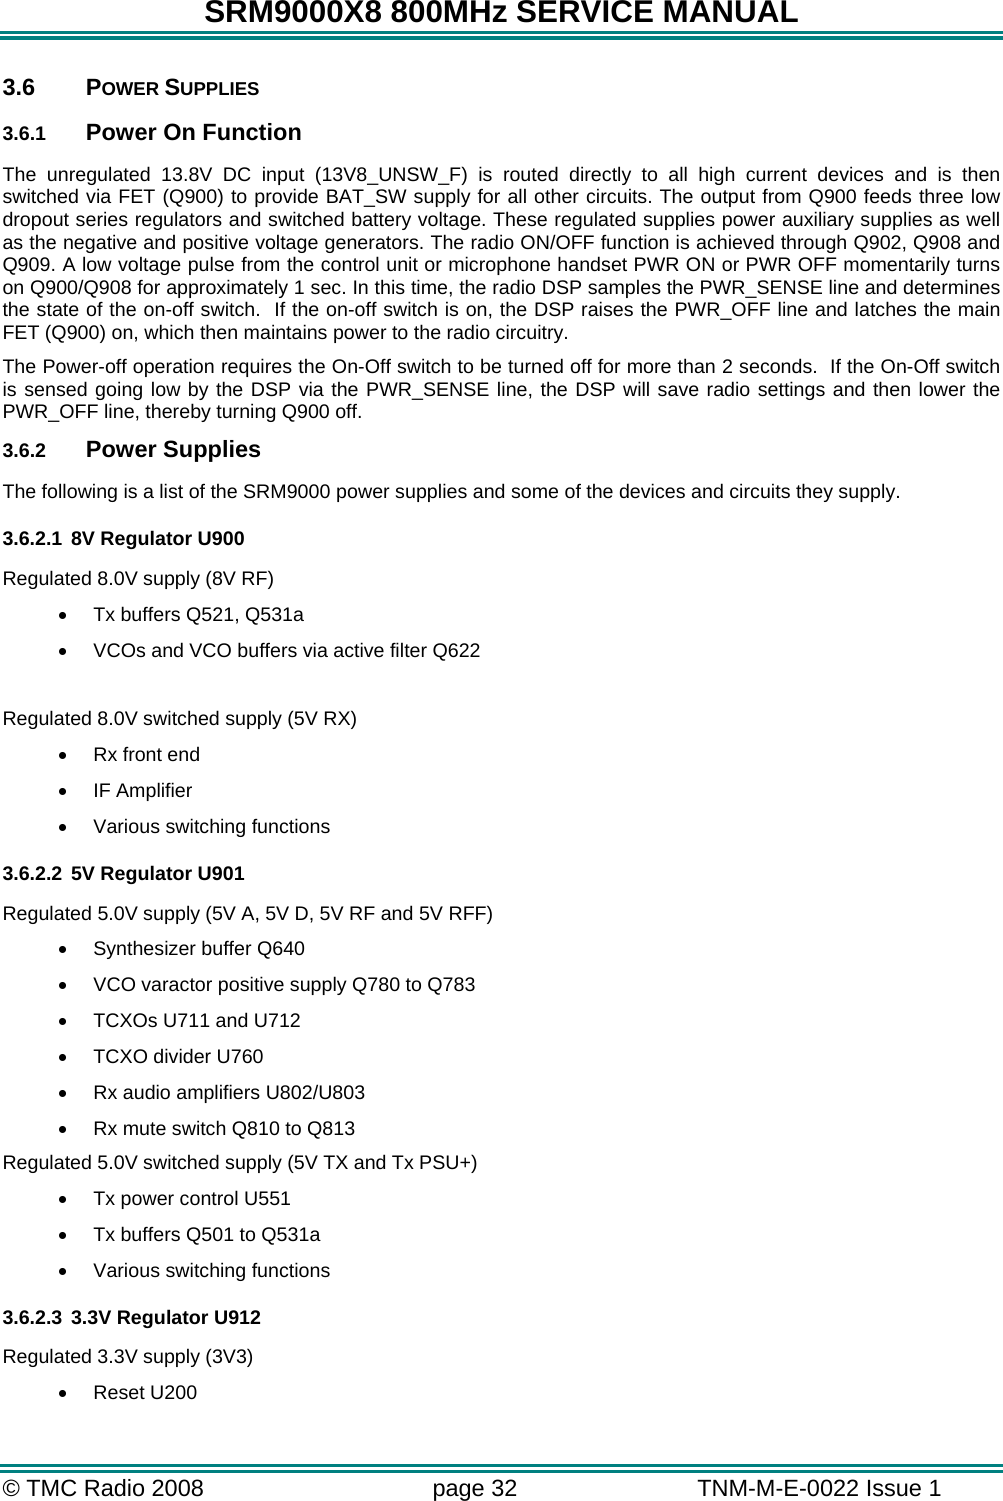 SRM9000X8 800MHz SERVICE MANUAL © TMC Radio 2008  page 32   TNM-M-E-0022 Issue 1  3.6 POWER SUPPLIES 3.6.1  Power On Function The unregulated 13.8V DC input (13V8_UNSW_F) is routed directly to all high current devices and is then switched via FET (Q900) to provide BAT_SW supply for all other circuits. The output from Q900 feeds three low dropout series regulators and switched battery voltage. These regulated supplies power auxiliary supplies as well as the negative and positive voltage generators. The radio ON/OFF function is achieved through Q902, Q908 and Q909. A low voltage pulse from the control unit or microphone handset PWR ON or PWR OFF momentarily turns on Q900/Q908 for approximately 1 sec. In this time, the radio DSP samples the PWR_SENSE line and determines the state of the on-off switch.  If the on-off switch is on, the DSP raises the PWR_OFF line and latches the main FET (Q900) on, which then maintains power to the radio circuitry. The Power-off operation requires the On-Off switch to be turned off for more than 2 seconds.  If the On-Off switch is sensed going low by the DSP via the PWR_SENSE line, the DSP will save radio settings and then lower the PWR_OFF line, thereby turning Q900 off. 3.6.2  Power Supplies The following is a list of the SRM9000 power supplies and some of the devices and circuits they supply. 3.6.2.1 8V Regulator U900 Regulated 8.0V supply (8V RF) •  Tx buffers Q521, Q531a •  VCOs and VCO buffers via active filter Q622  Regulated 8.0V switched supply (5V RX) •  Rx front end •  IF Amplifier •  Various switching functions 3.6.2.2 5V Regulator U901 Regulated 5.0V supply (5V A, 5V D, 5V RF and 5V RFF) •  Synthesizer buffer Q640 •  VCO varactor positive supply Q780 to Q783 •  TCXOs U711 and U712 •  TCXO divider U760 •  Rx audio amplifiers U802/U803 •  Rx mute switch Q810 to Q813  Regulated 5.0V switched supply (5V TX and Tx PSU+) •  Tx power control U551 •  Tx buffers Q501 to Q531a •  Various switching functions 3.6.2.3 3.3V Regulator U912 Regulated 3.3V supply (3V3) •  Reset U200 